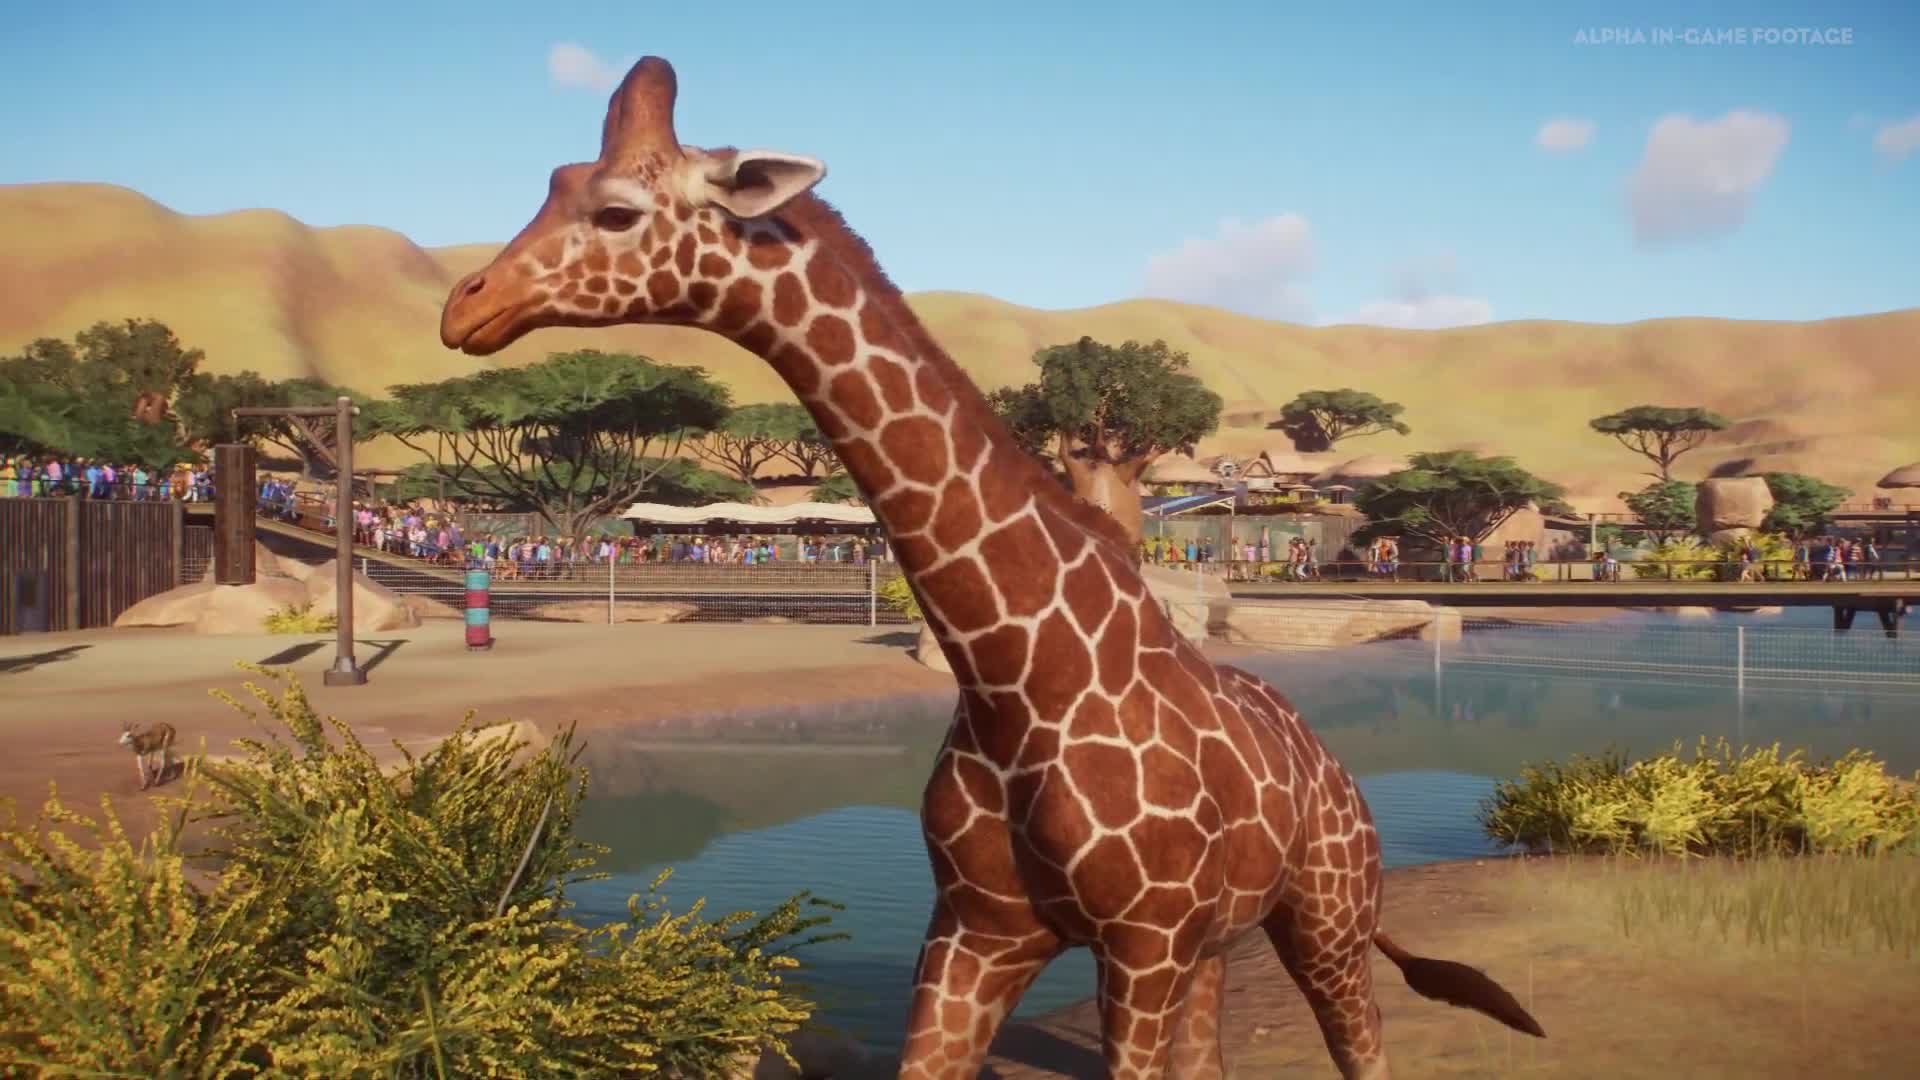 planet zoo game download free